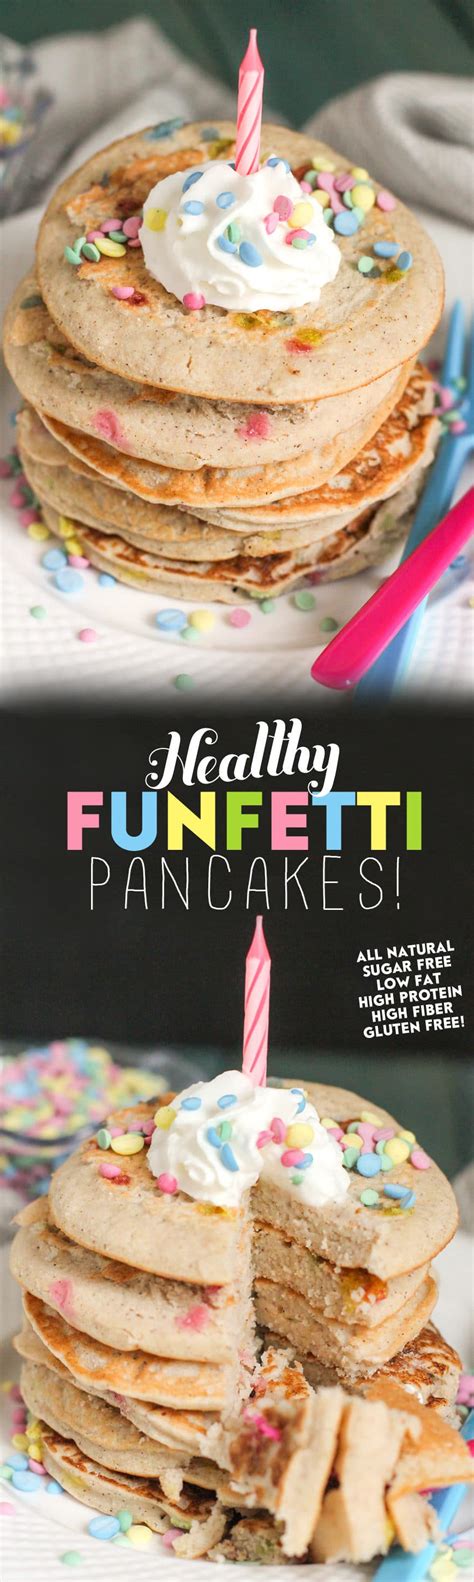 Some people believe that artificial sweeteners can cause. Healthy Funfetti Pancakes (all natural, sugar free, low ...